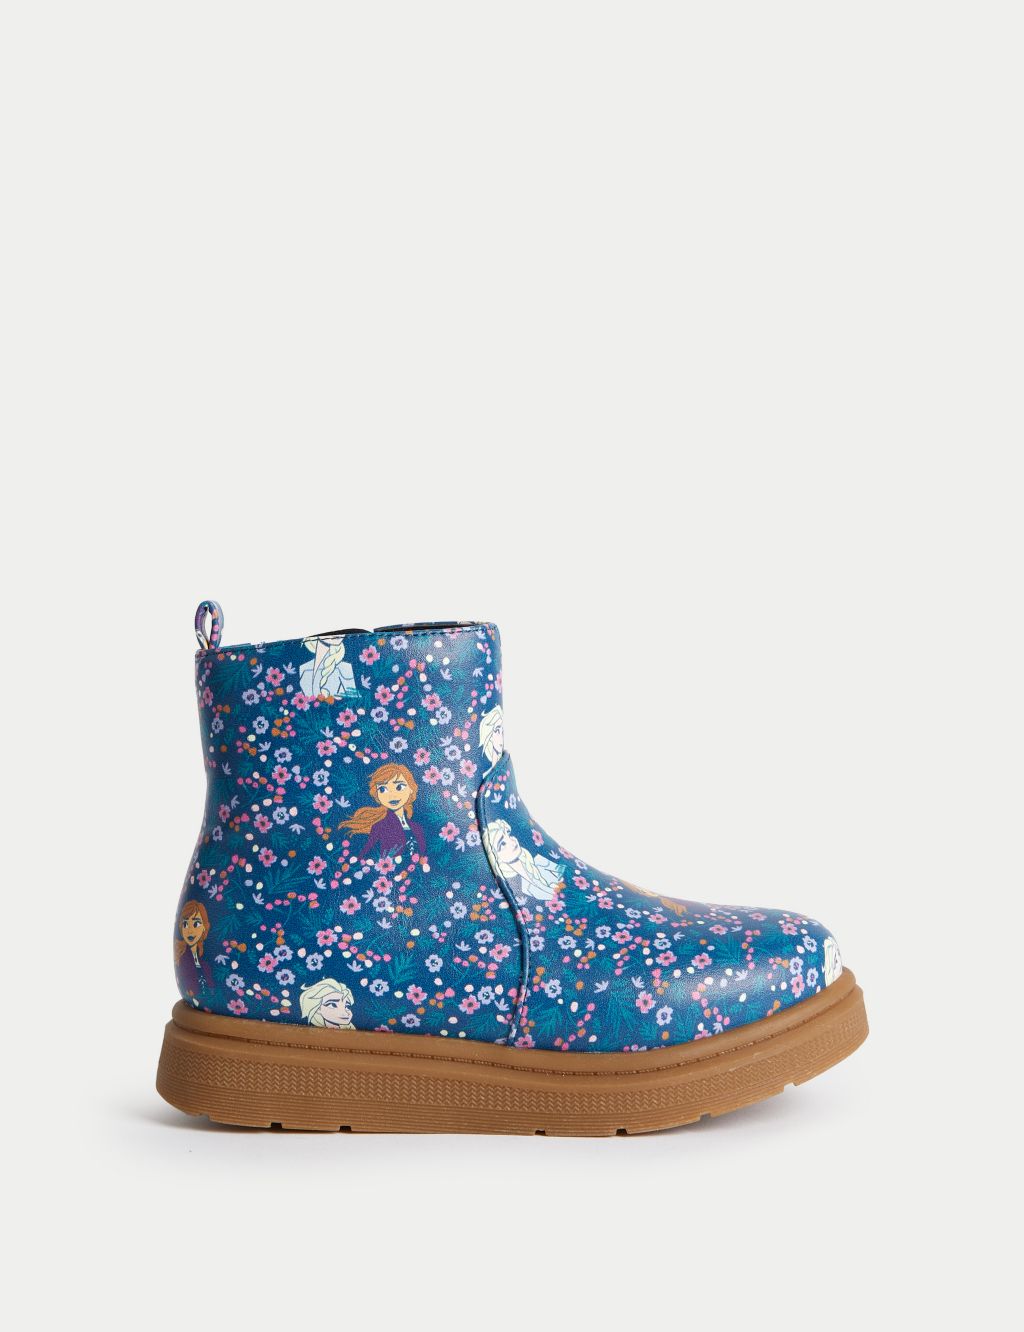 Kids' Disney Frozen™ Chelsea Boots (4 Small - 12 Small ) image 1